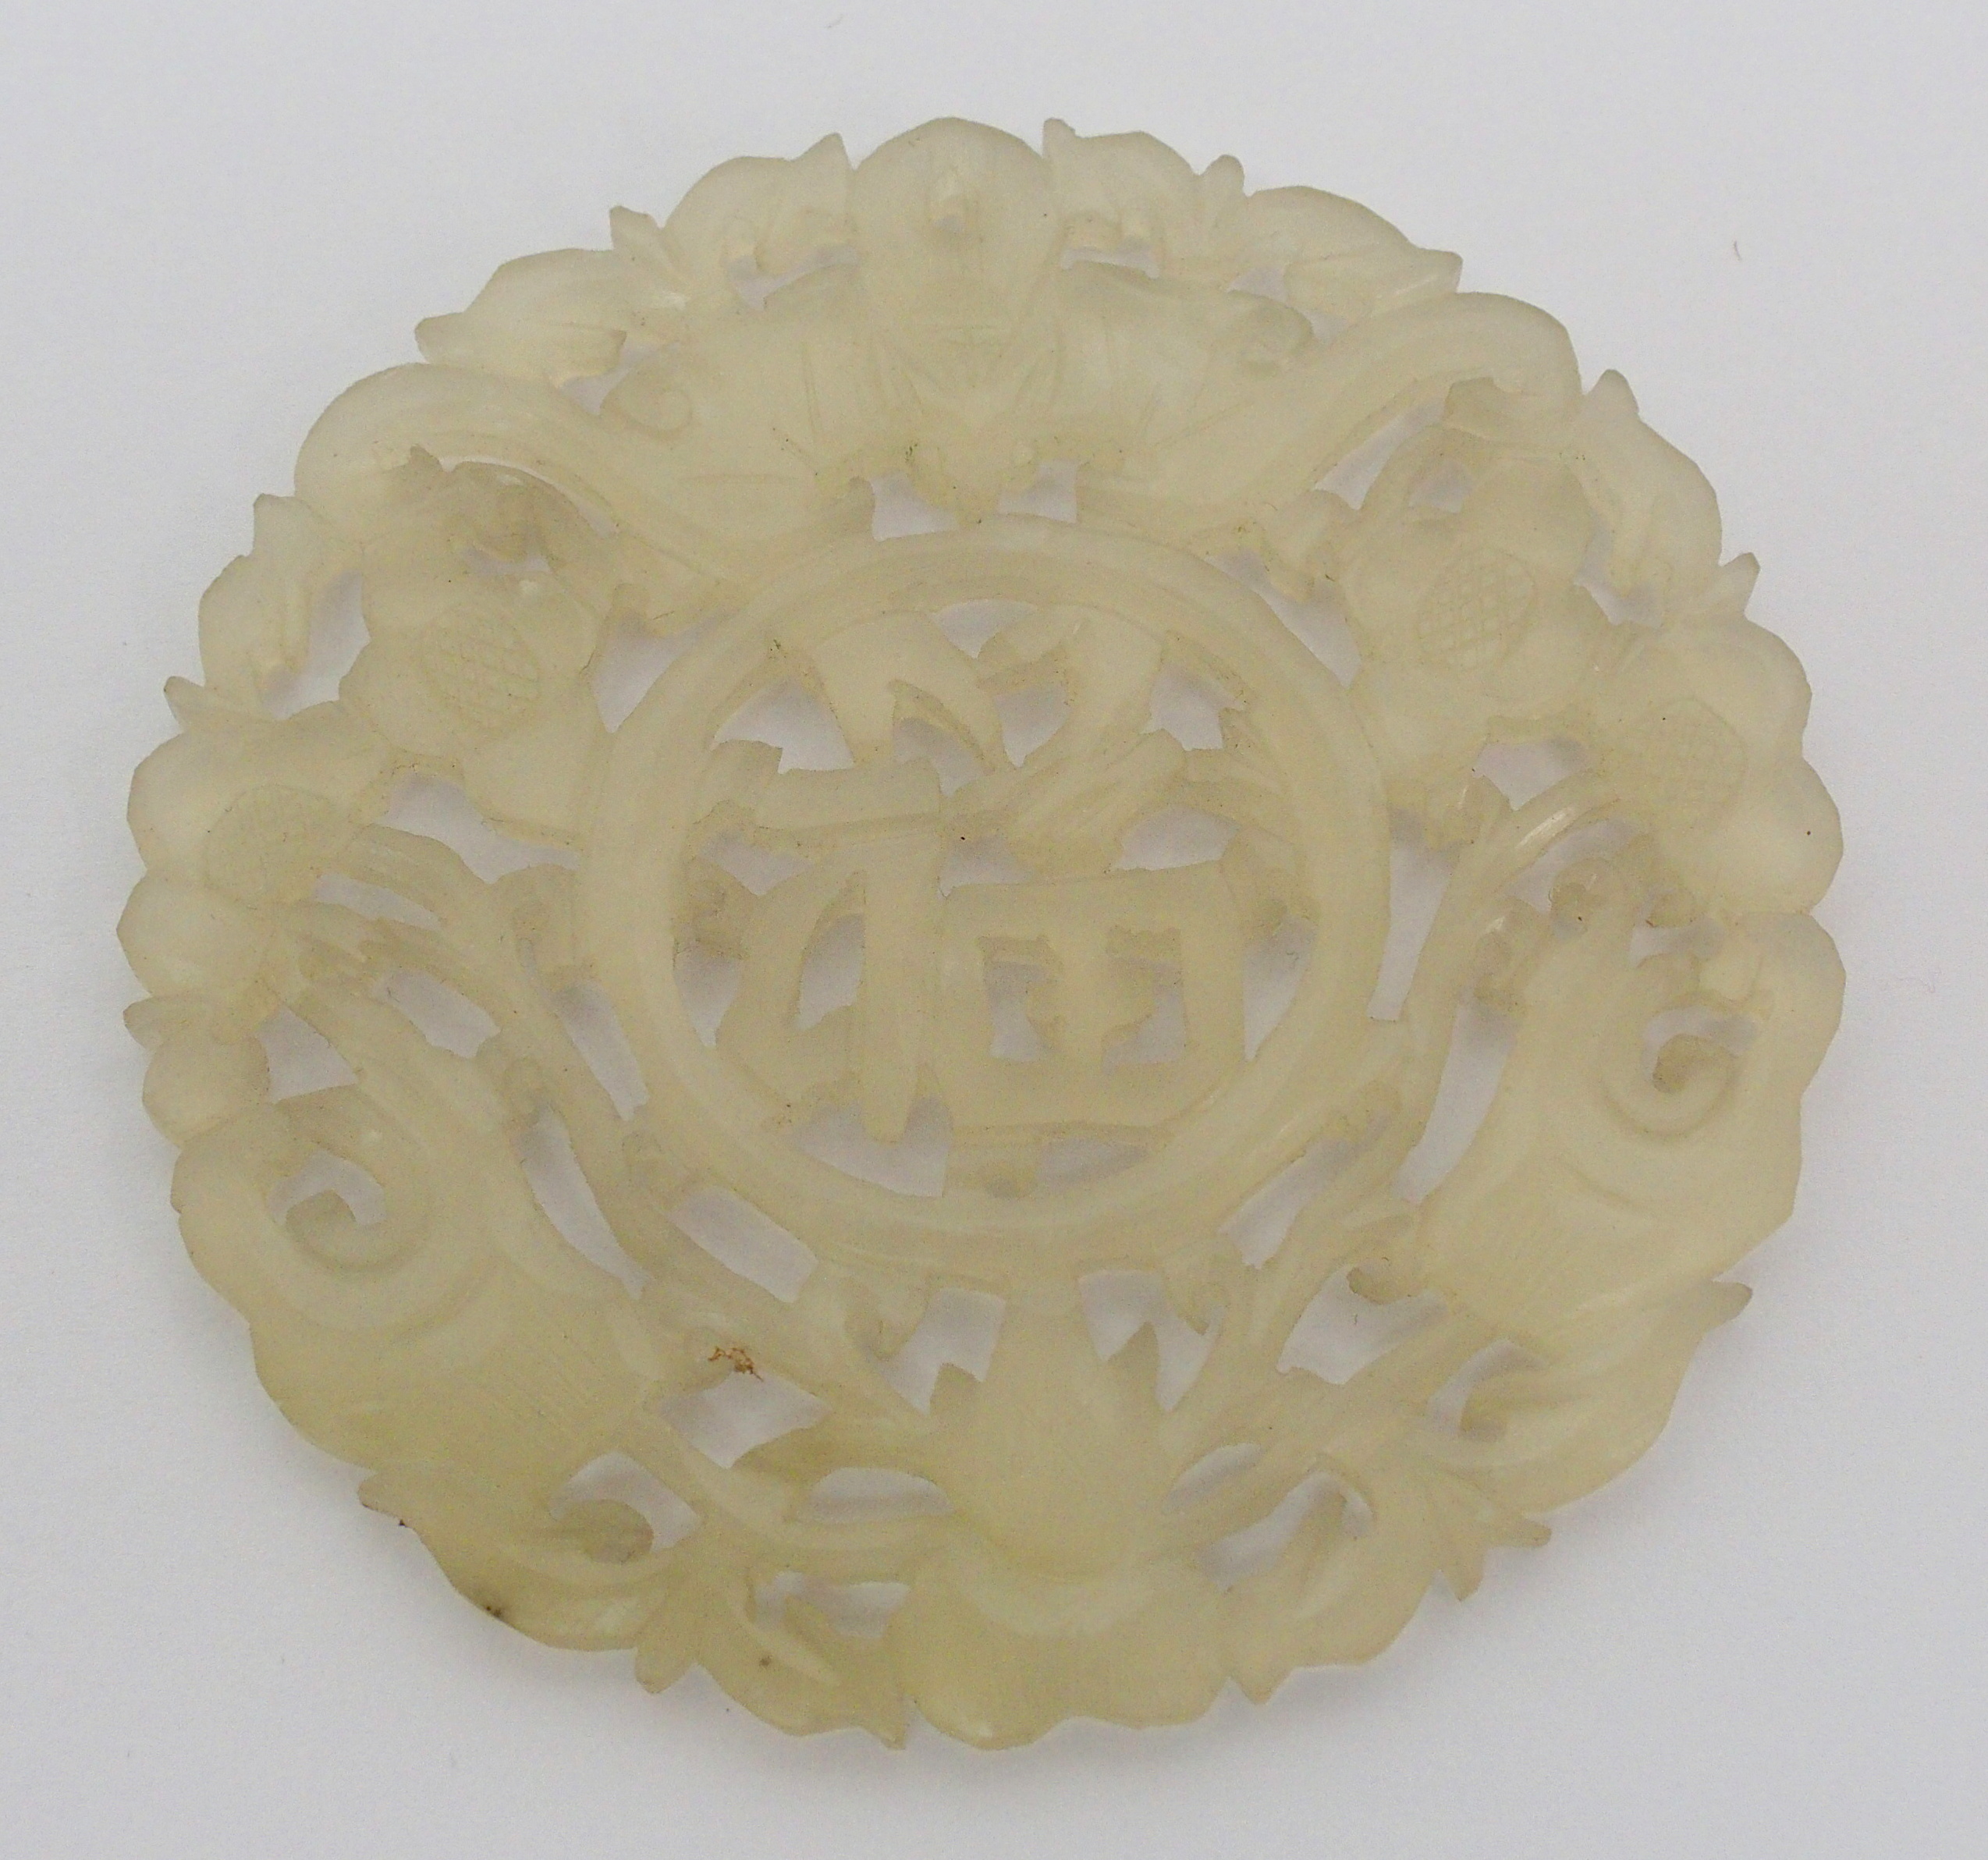 A Chinese hardstone medallion carved with bats surrounding characters, 7cm diameter, wood stand - Image 5 of 10